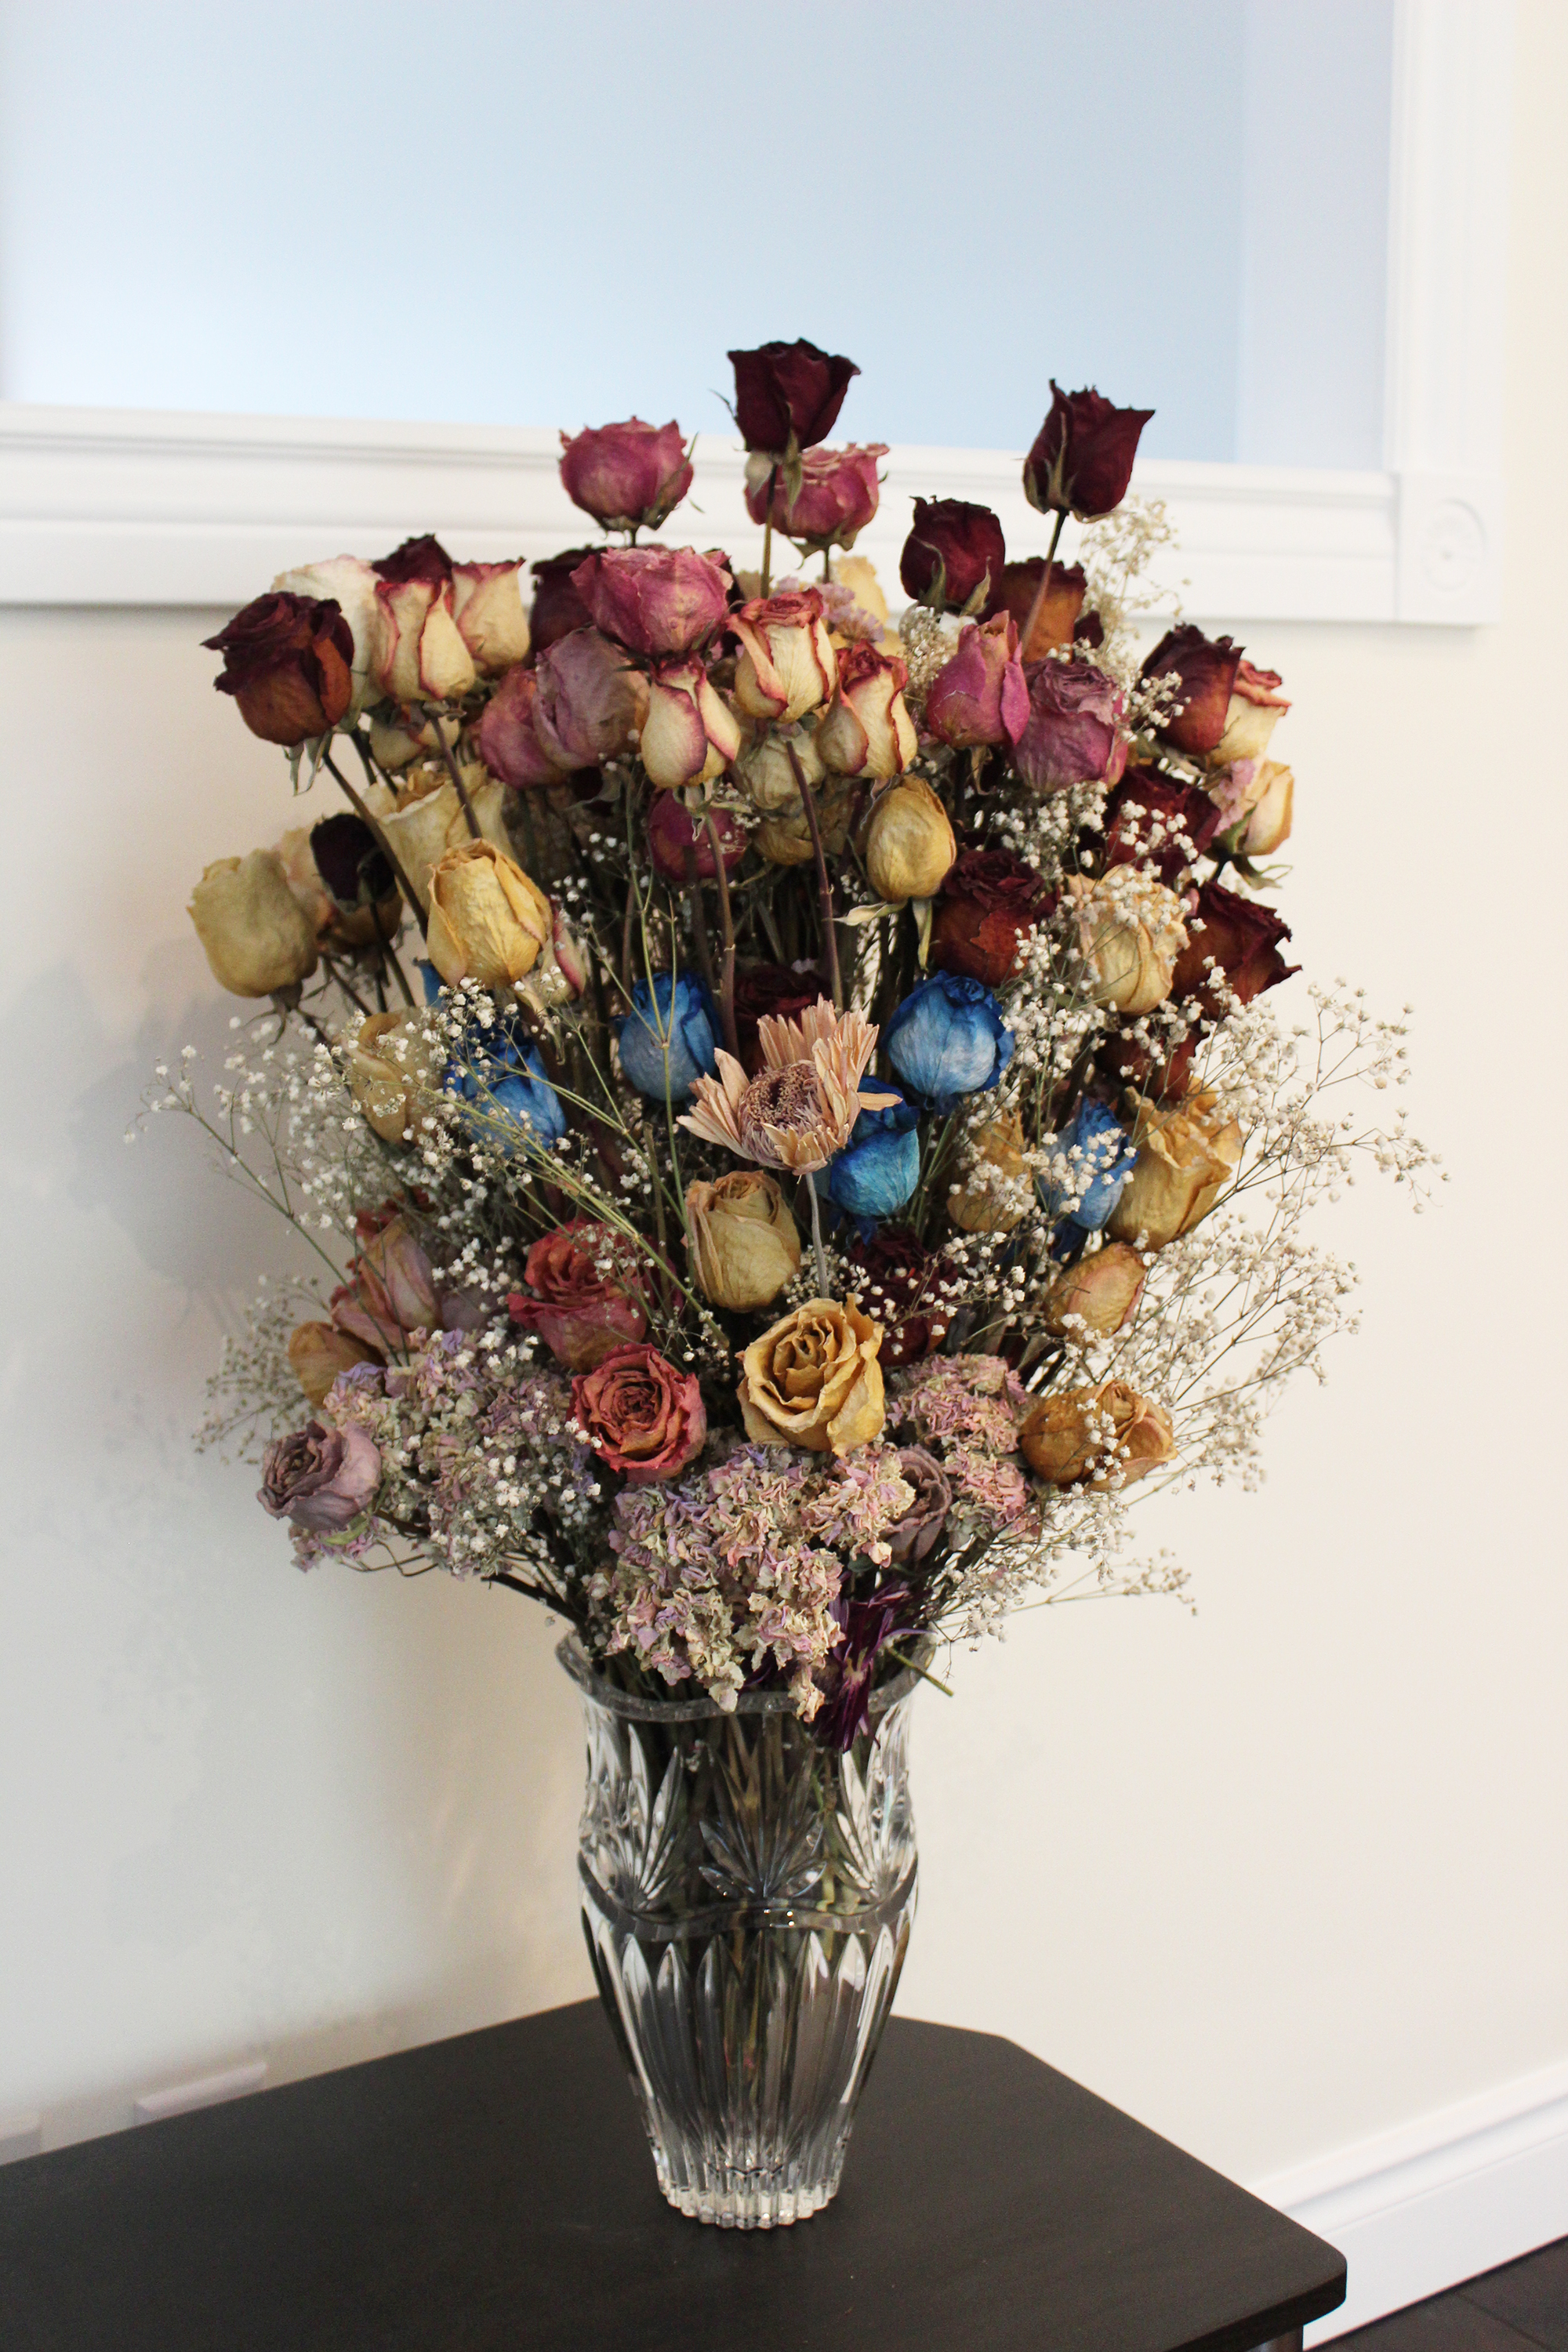 How To Store Dried Roses